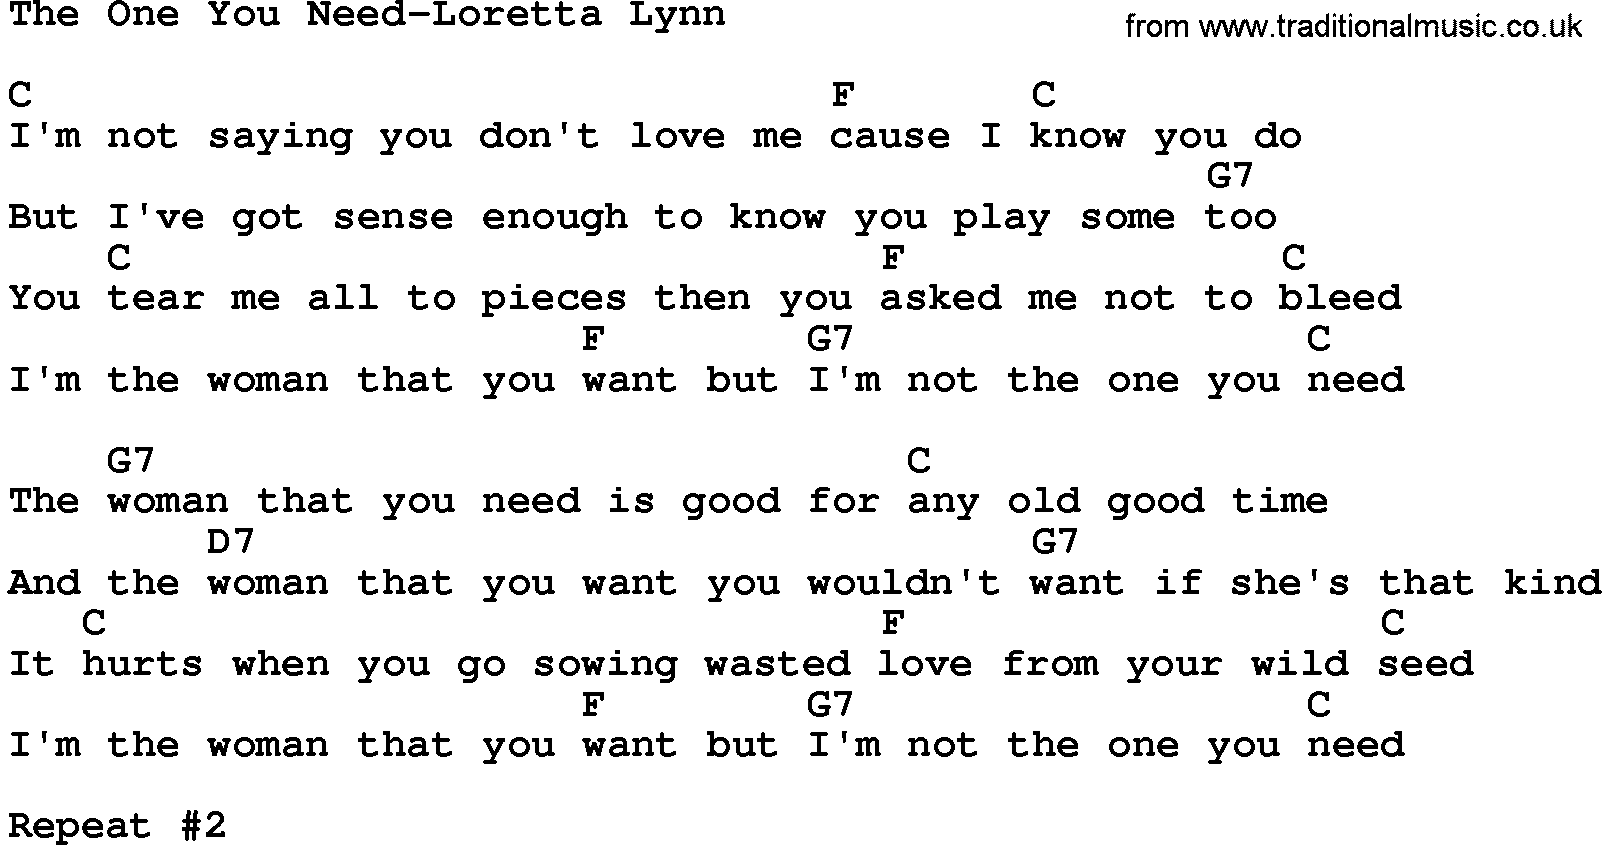 Country music song: The One You Need-Loretta Lynn lyrics and chords